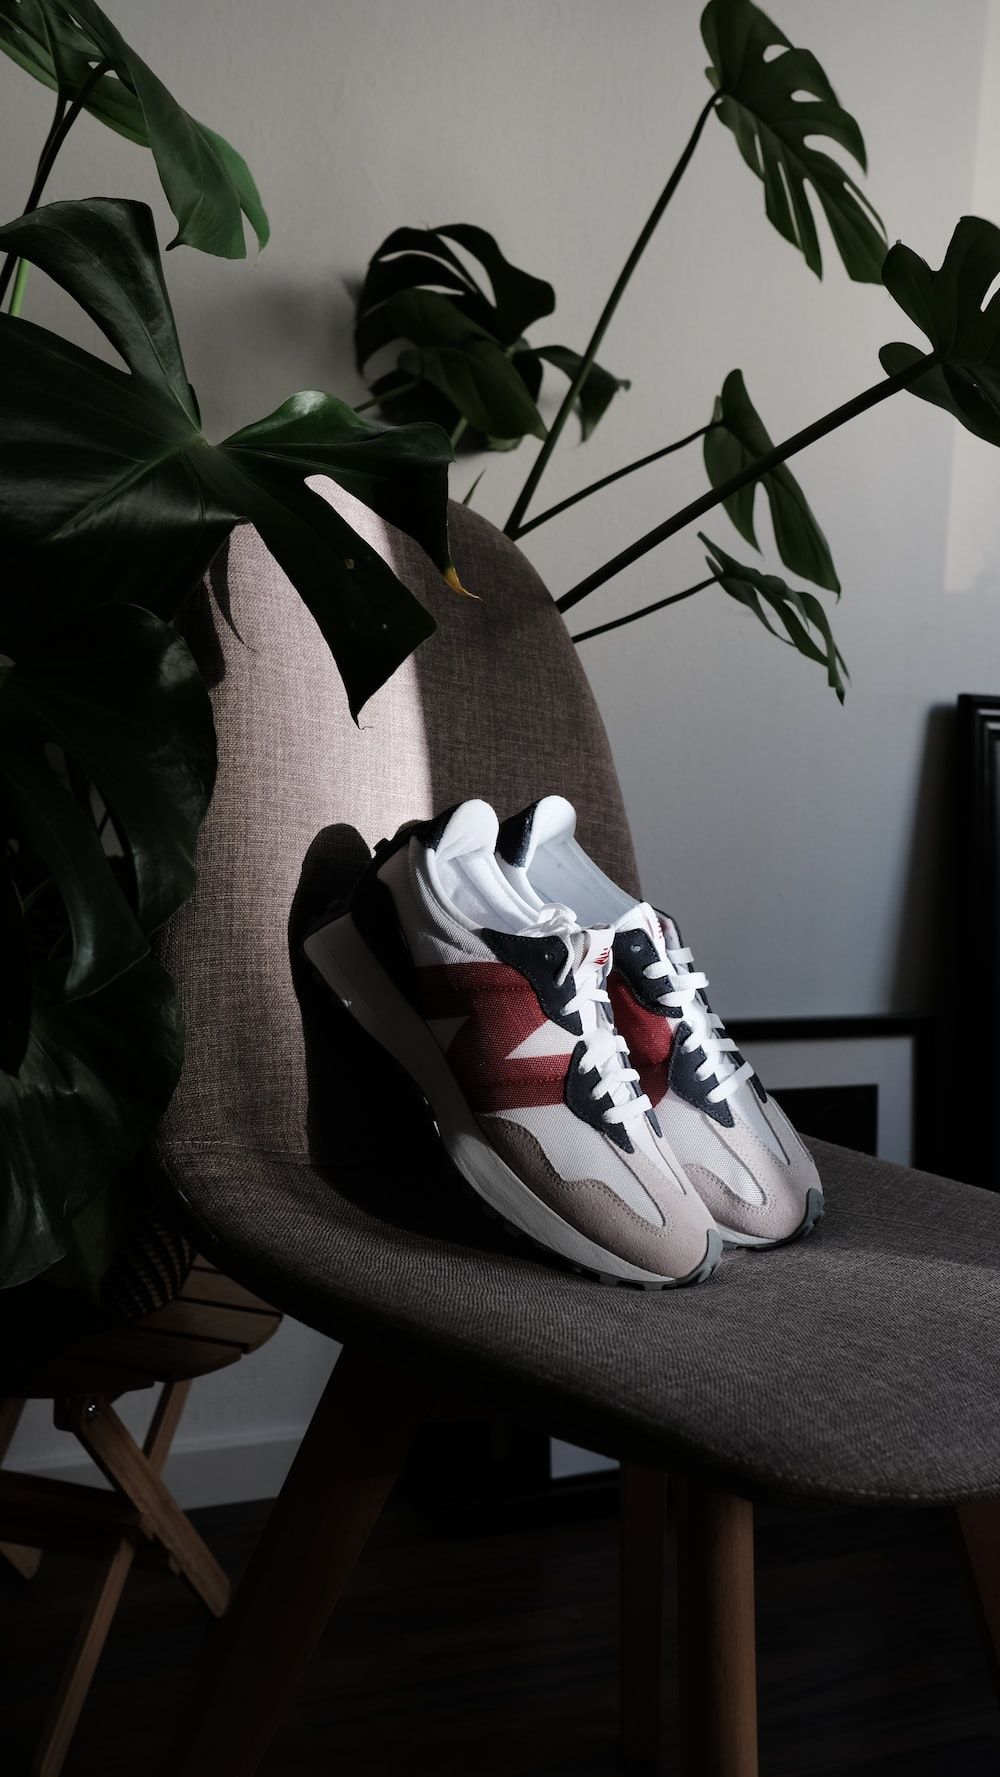 A pair of sneakers sitting on a chair next to a plant. - New Balance